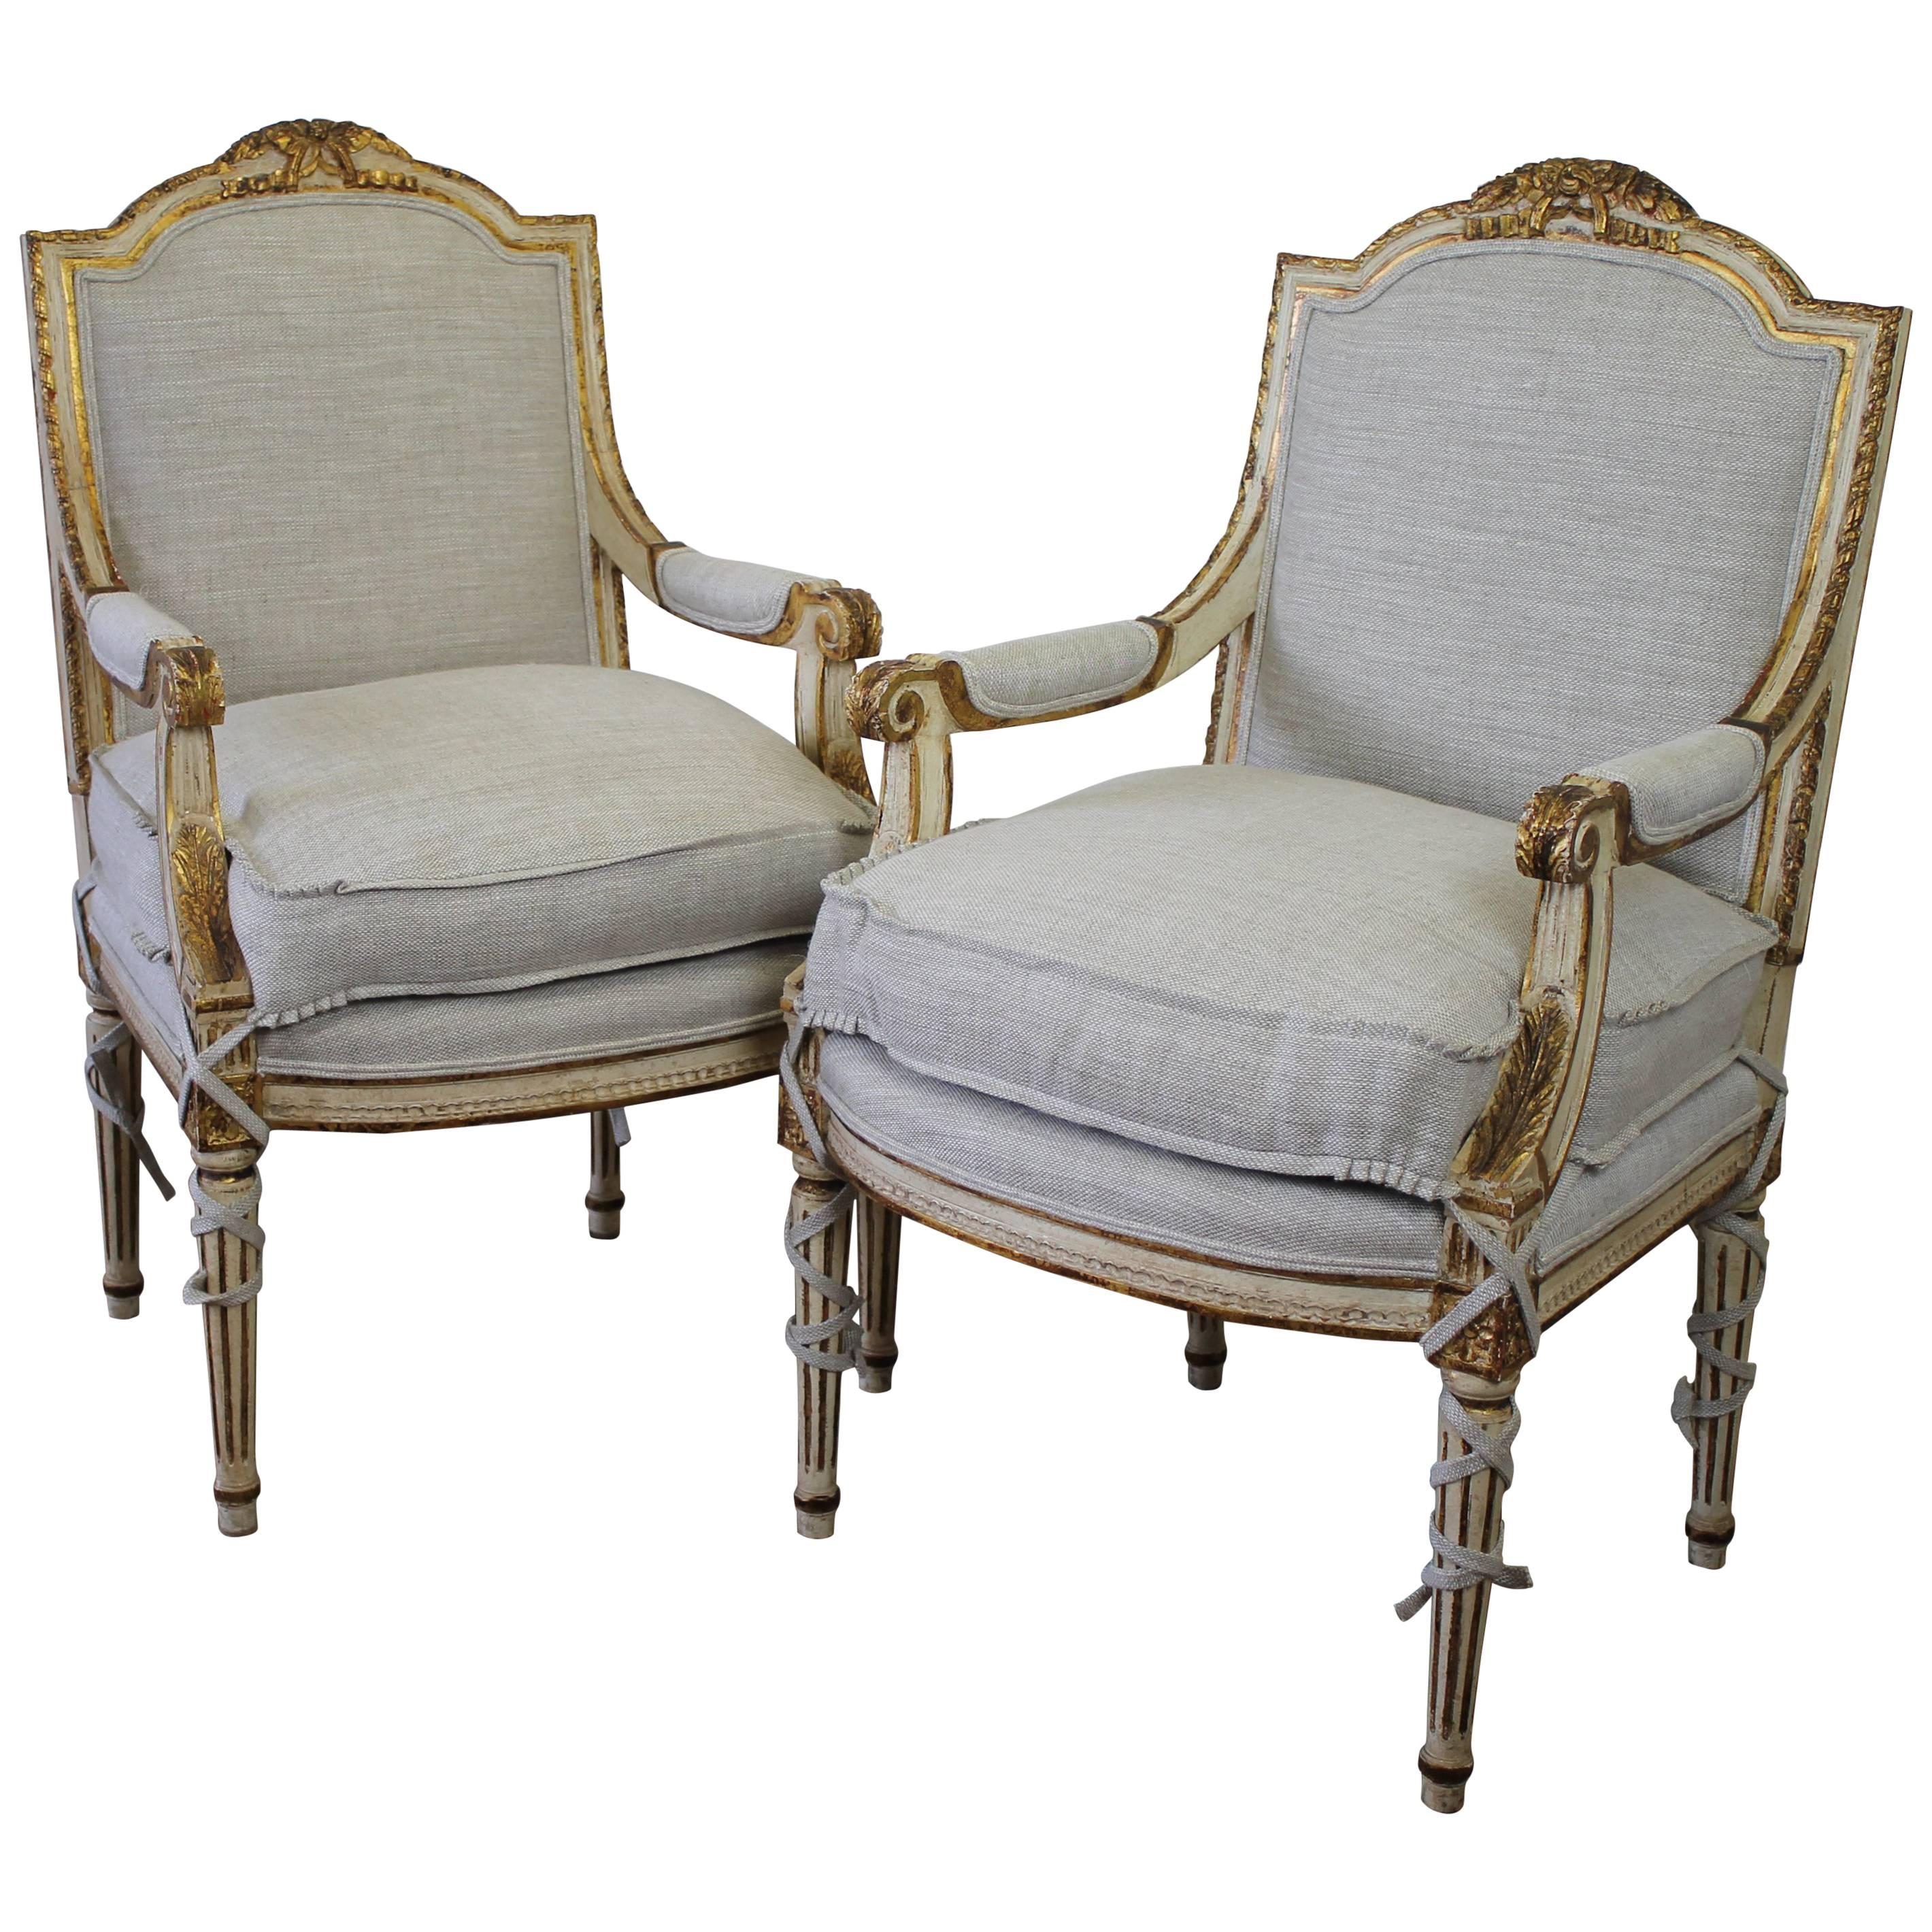 Pair of 20th Century Carved Painted and Gilt Upholstered Open Armchairs